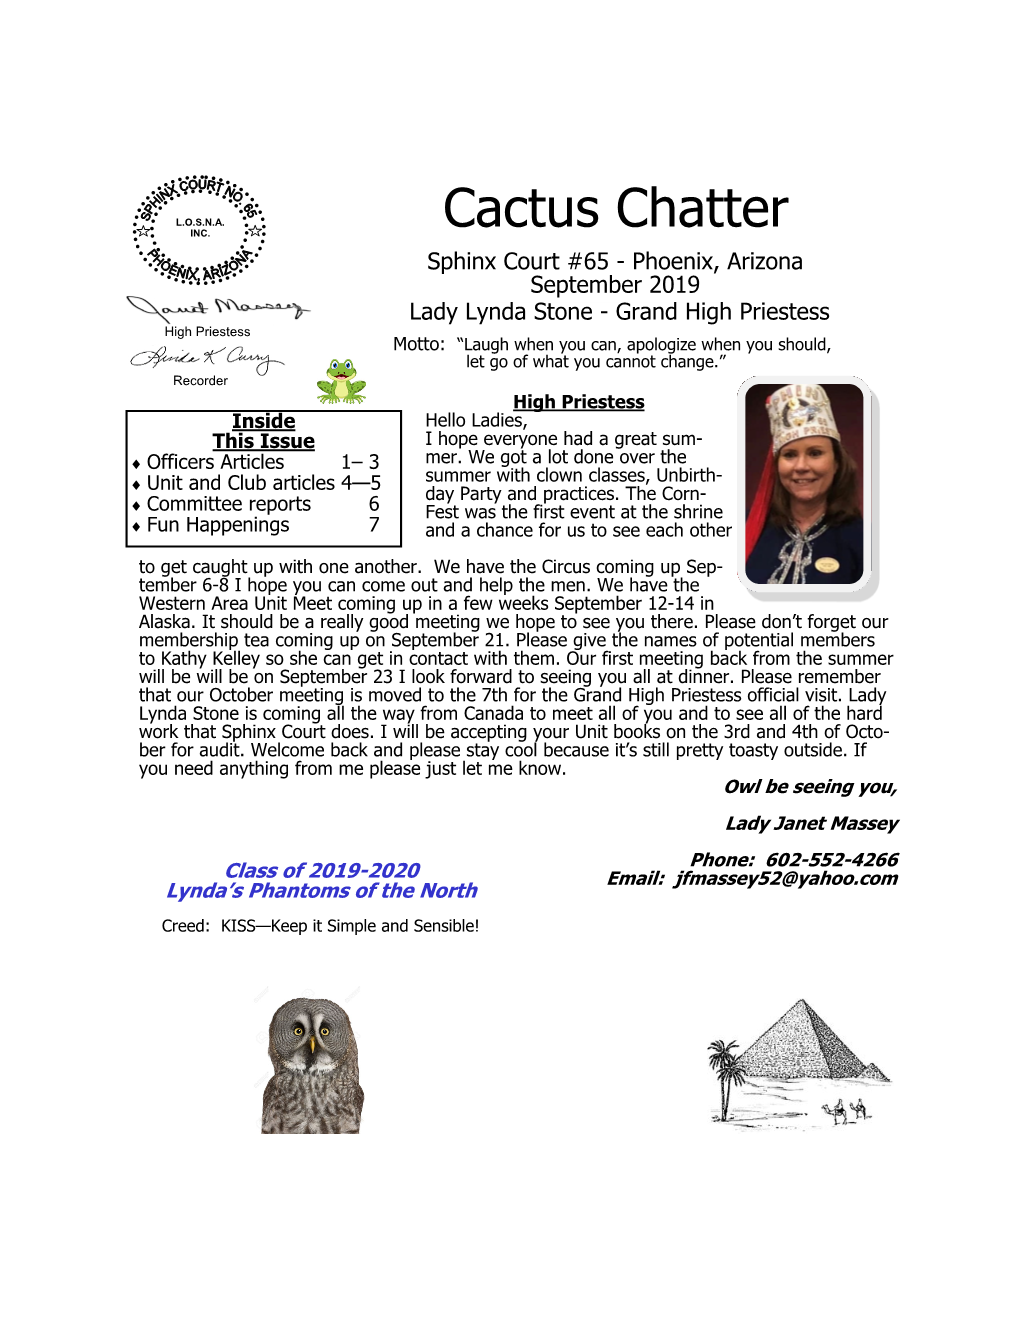 Cactus Chatter INC